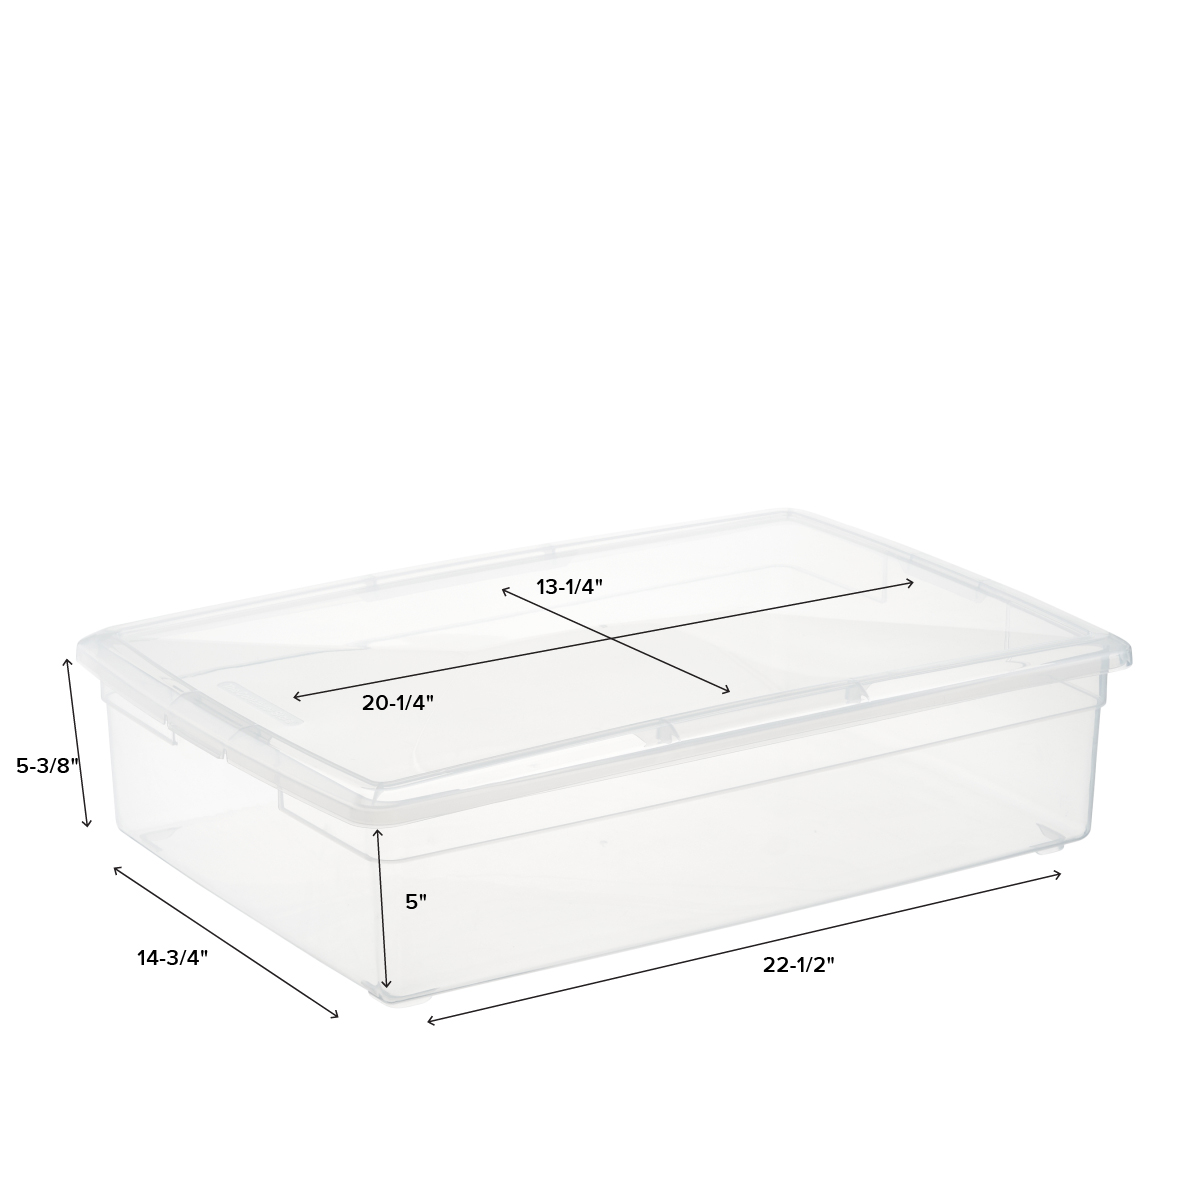 https://www.containerstore.com/catalogimages/419717/10023020-our-boot-box-DIM.jpg